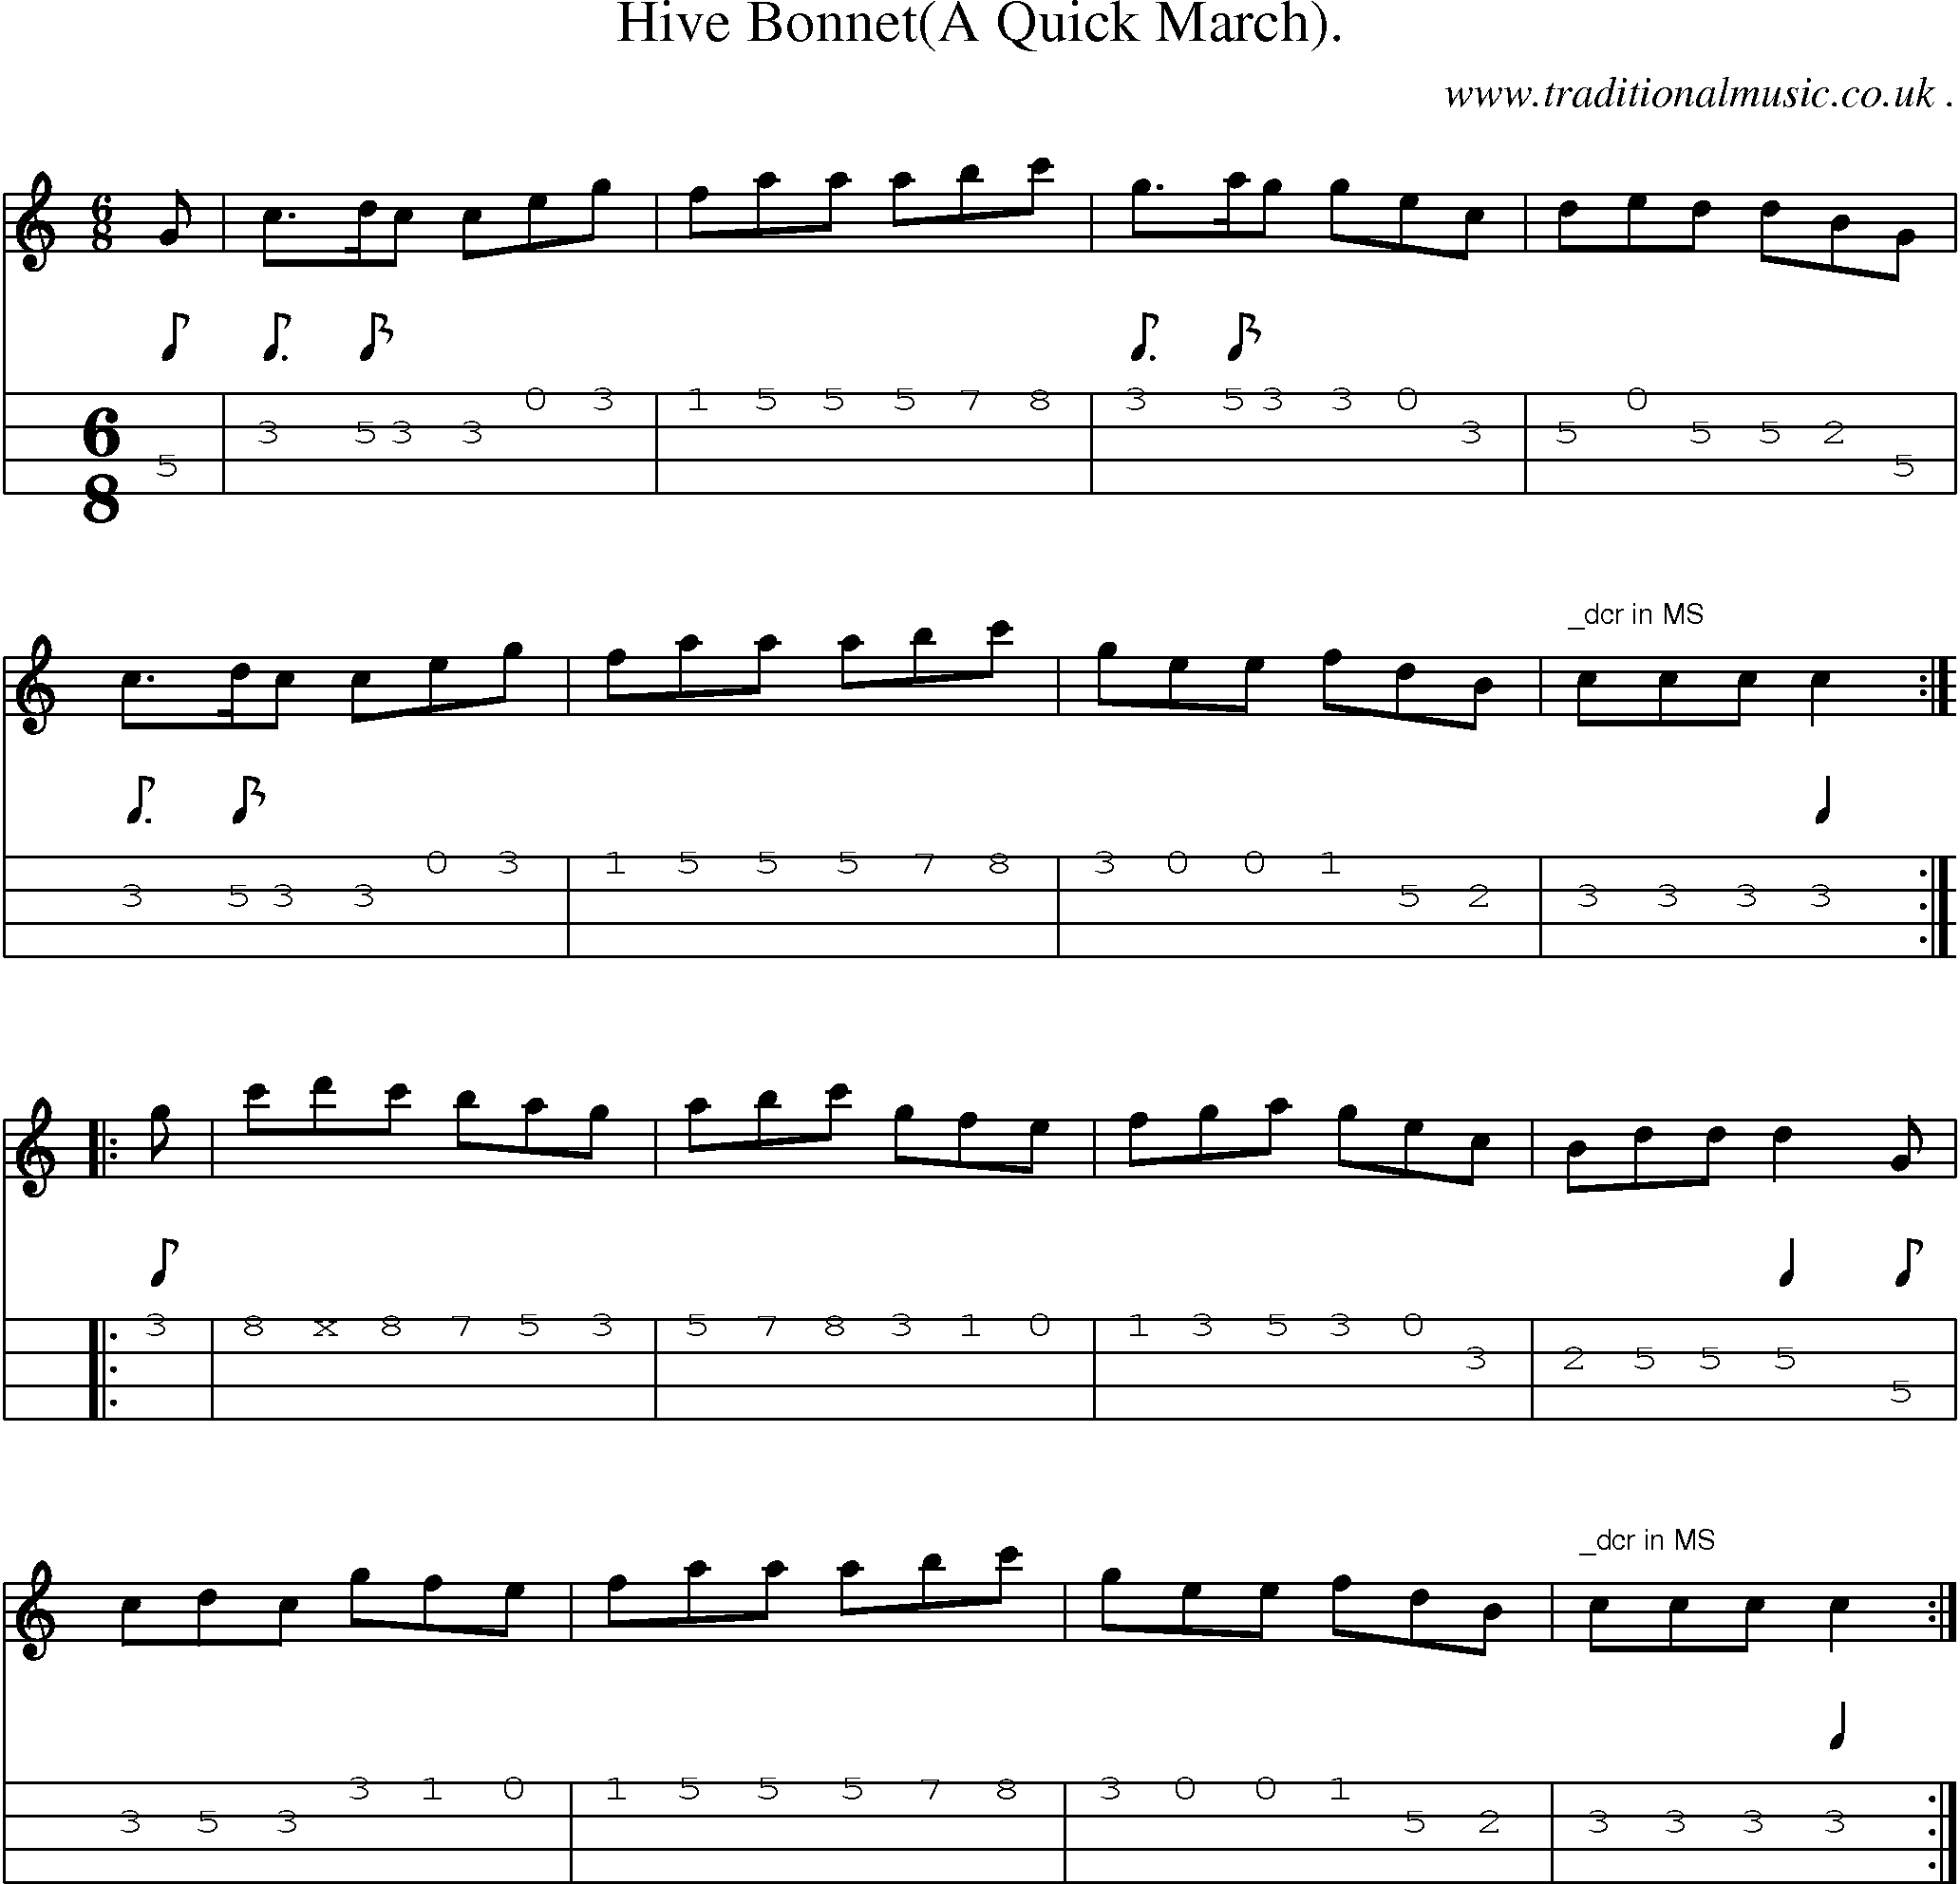 Sheet-Music and Mandolin Tabs for Hive Bonnet(a Quick March)